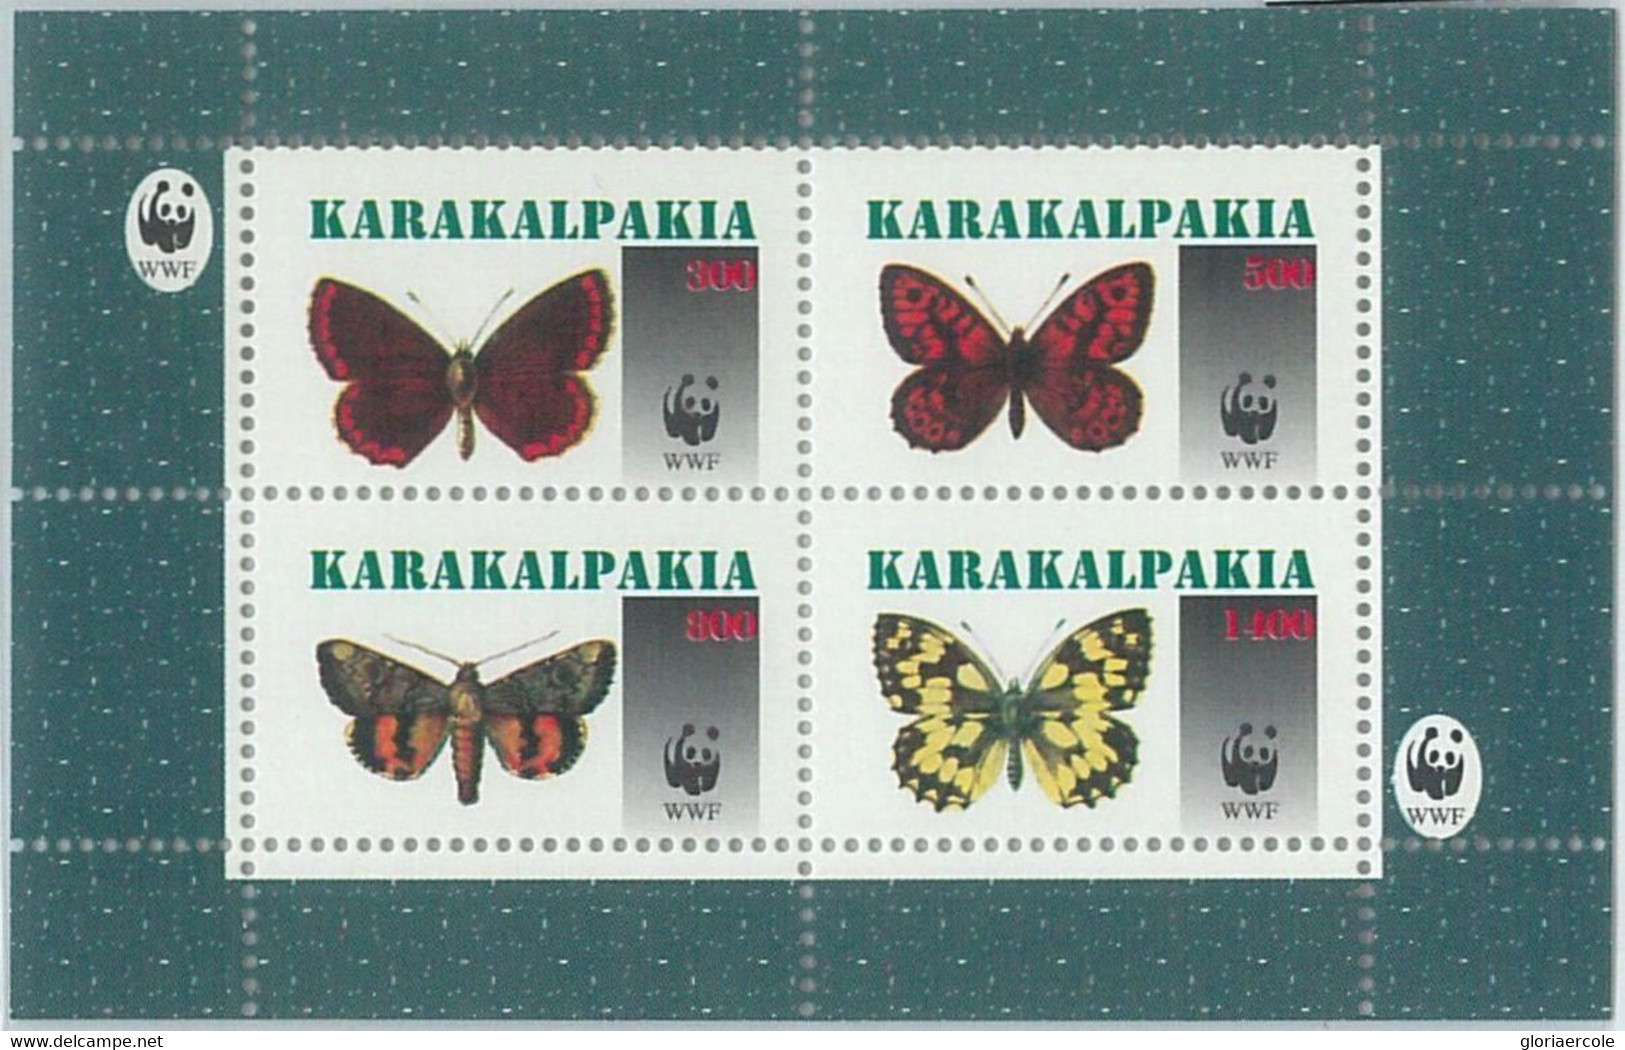 M2001 - RUSSIAN STATE, SHEET: WWF, Butterflies, Insects  R04.22 - Used Stamps